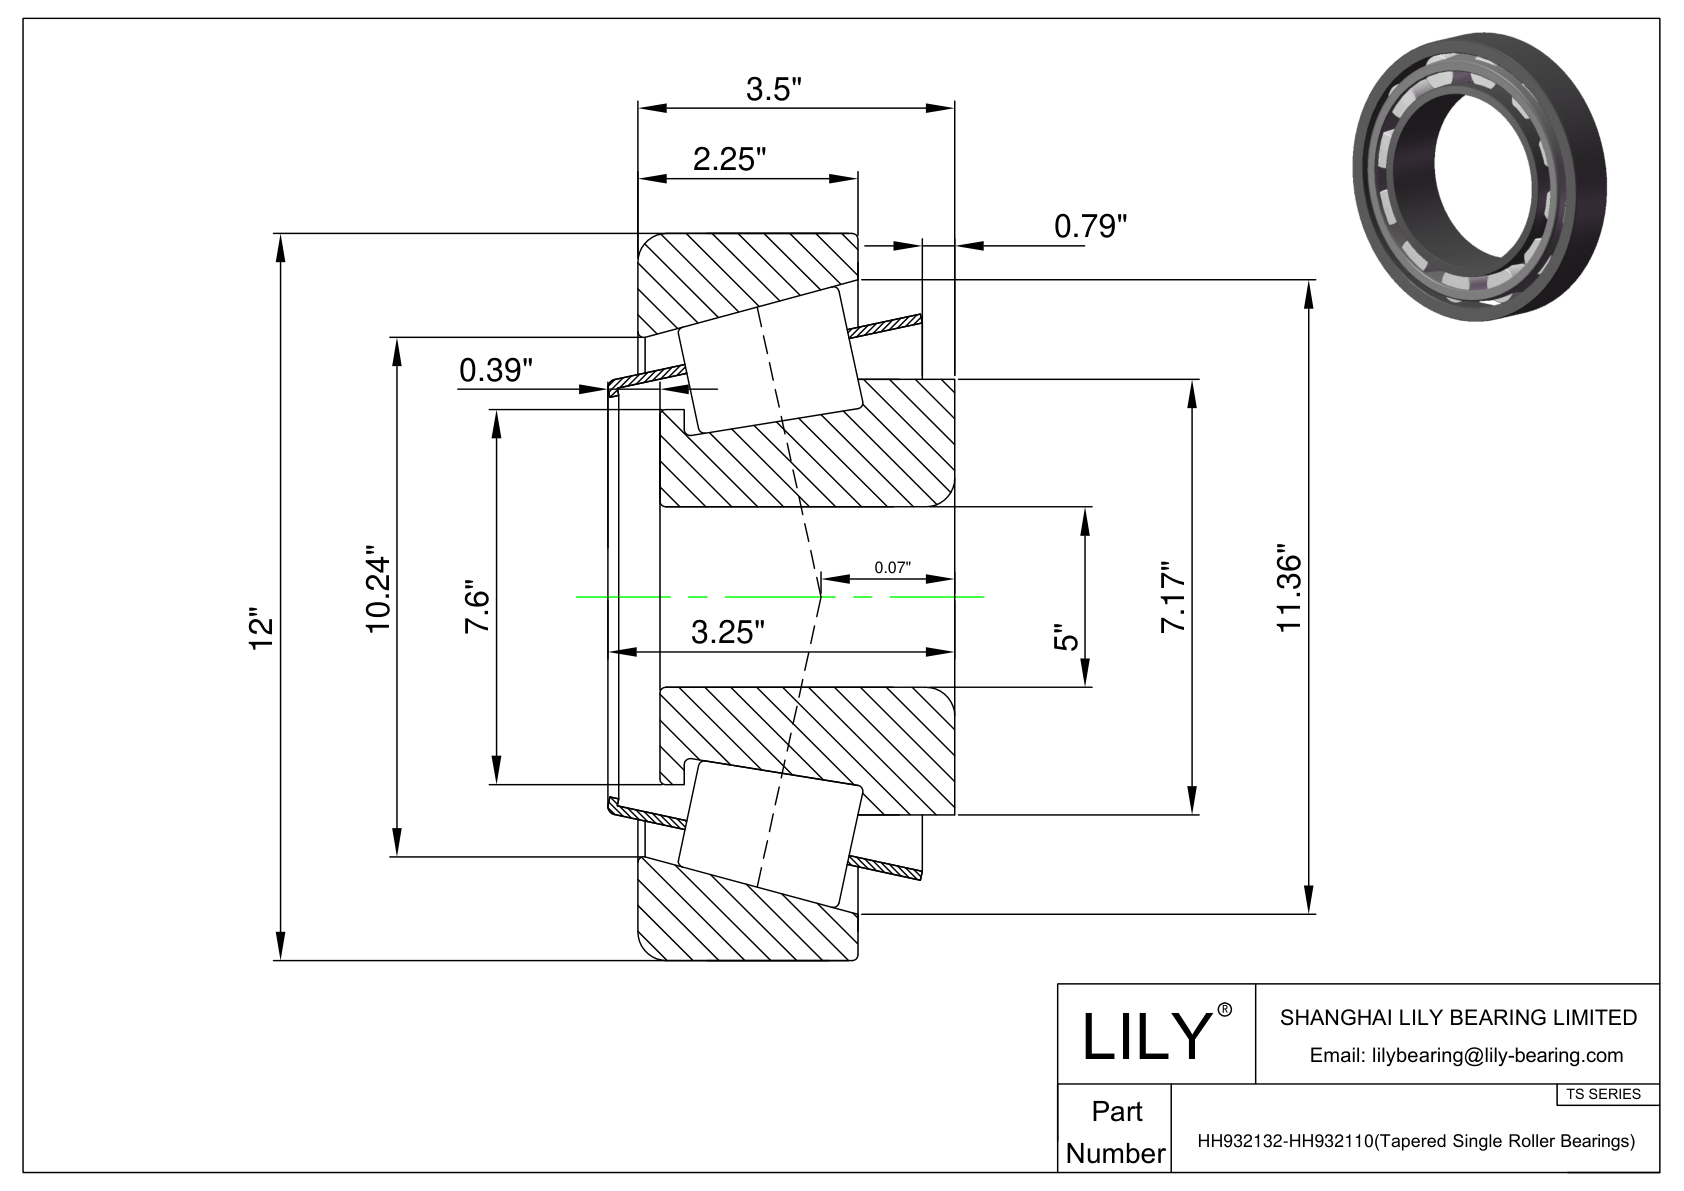 HH932132-HH932110 TS (Tapered Single Roller Bearings) (Imperial) cad drawing